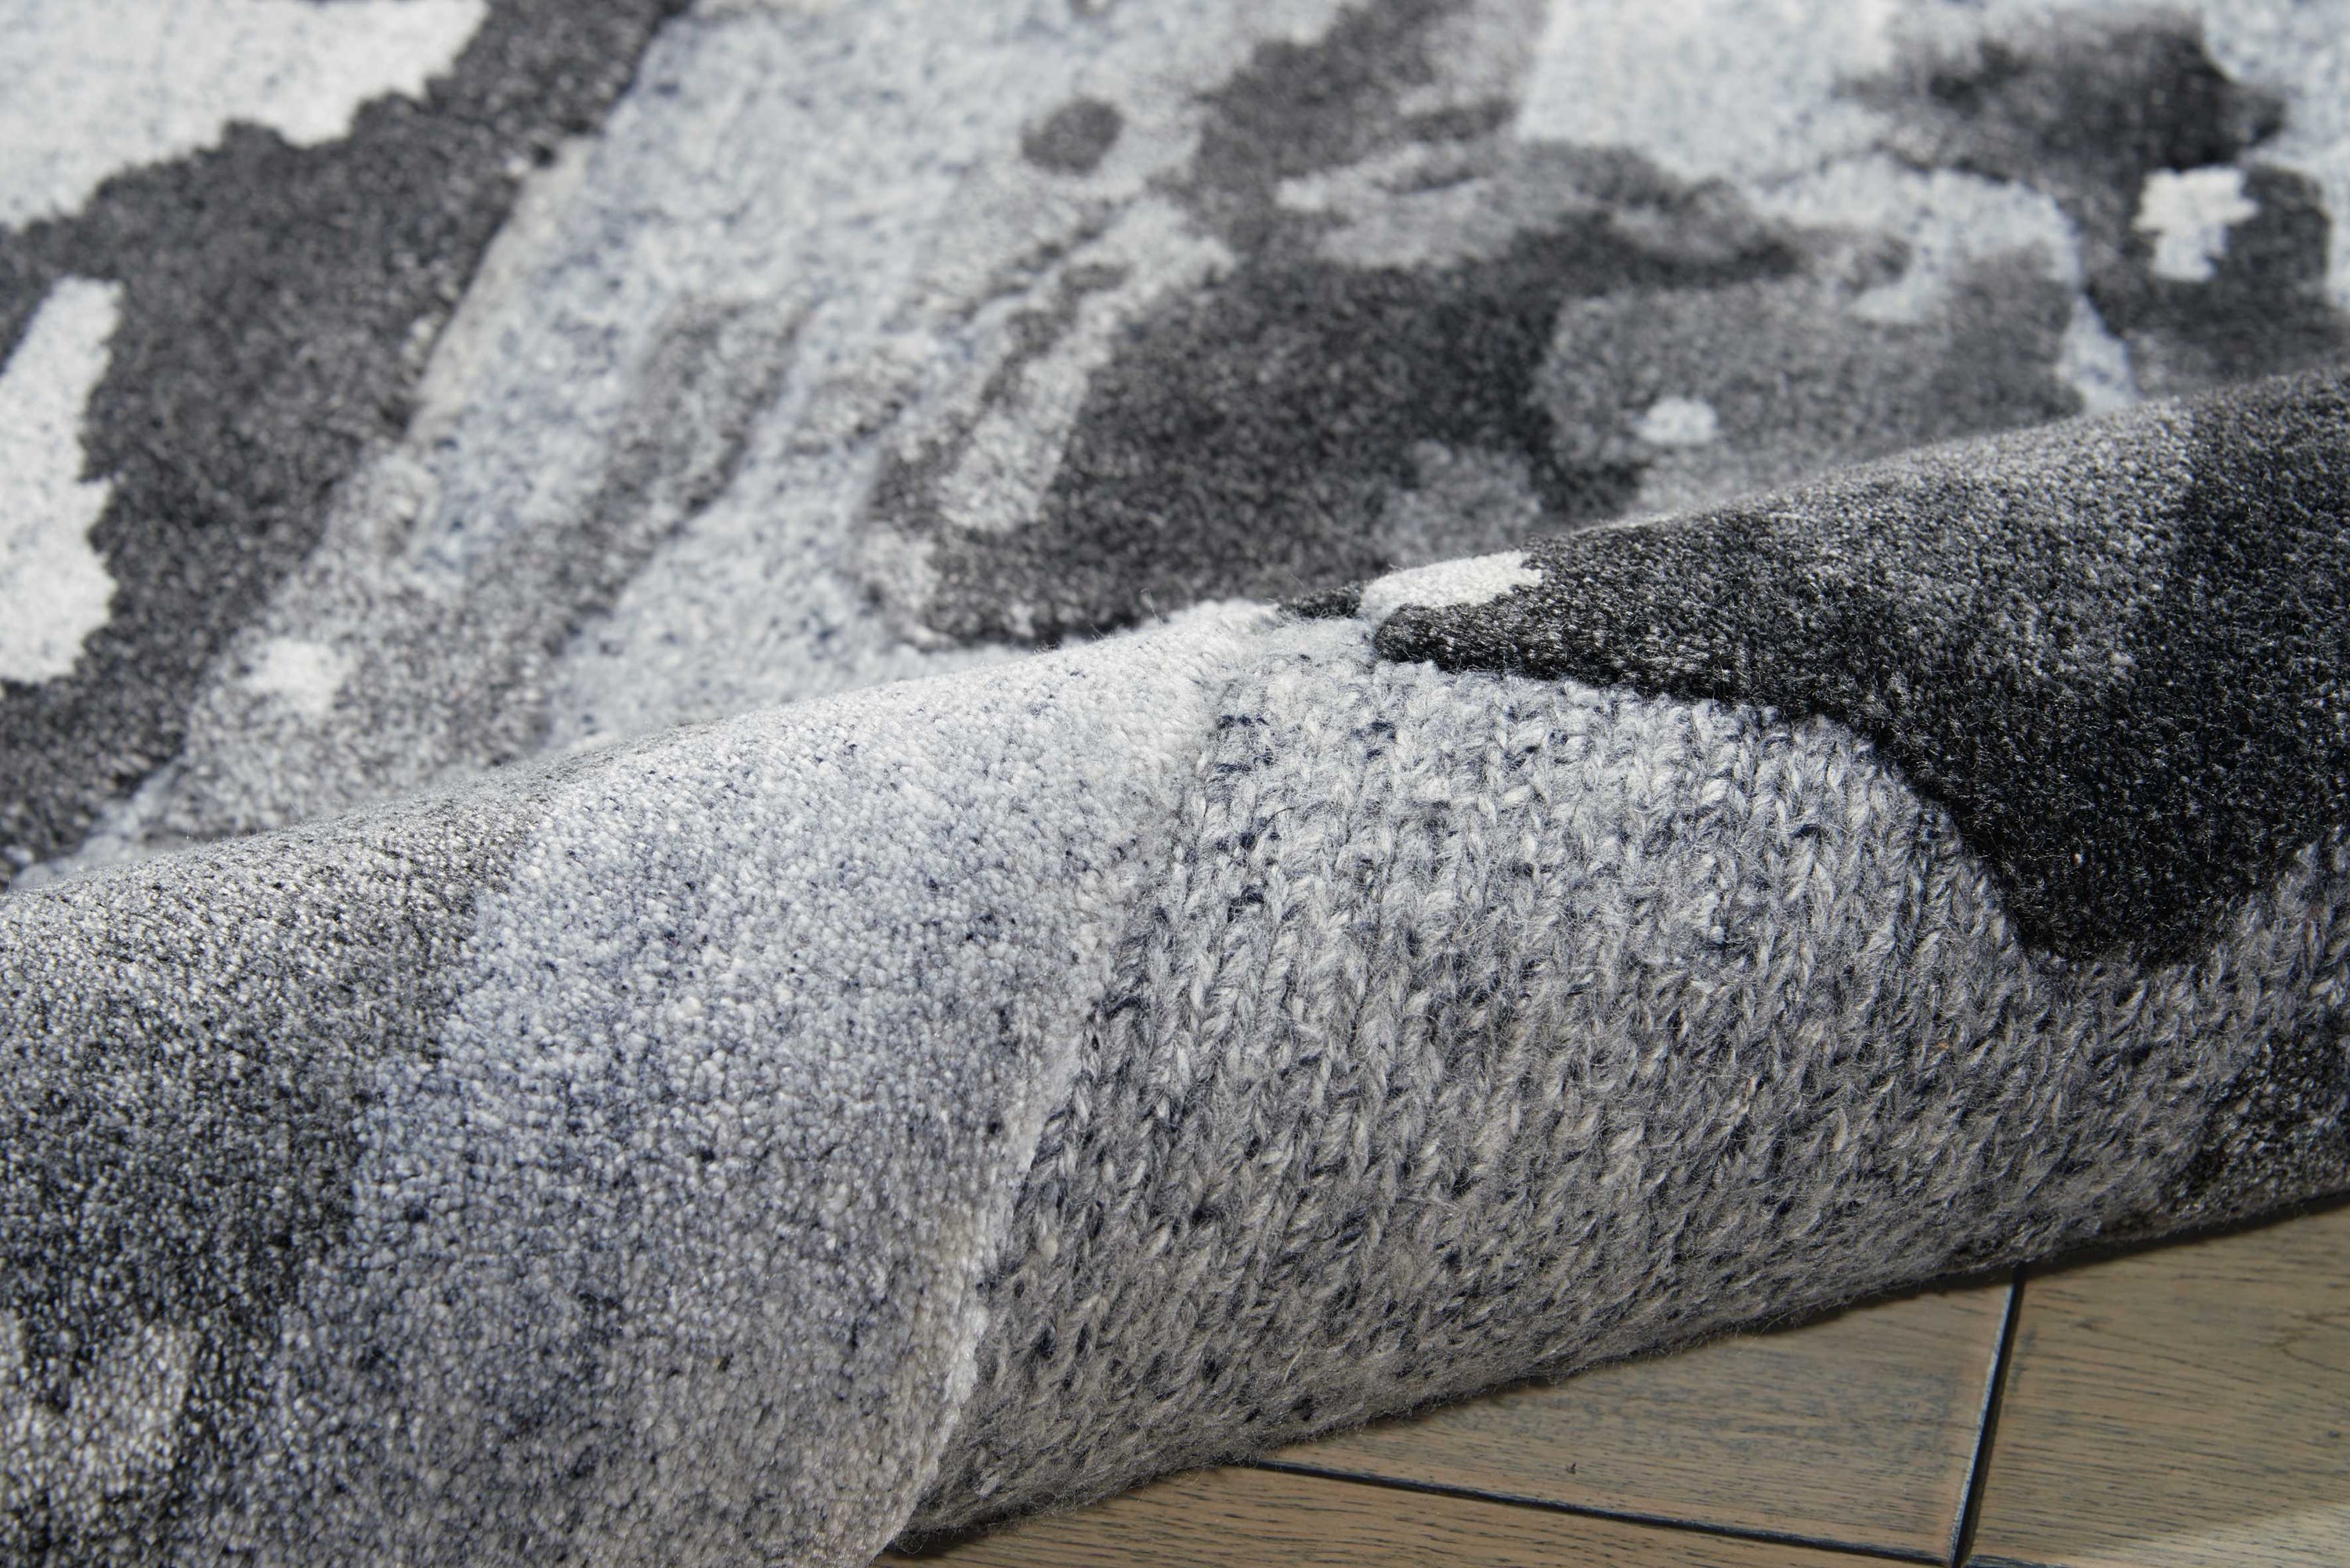 Close-up of a textured gray fabric with tufted yarns.